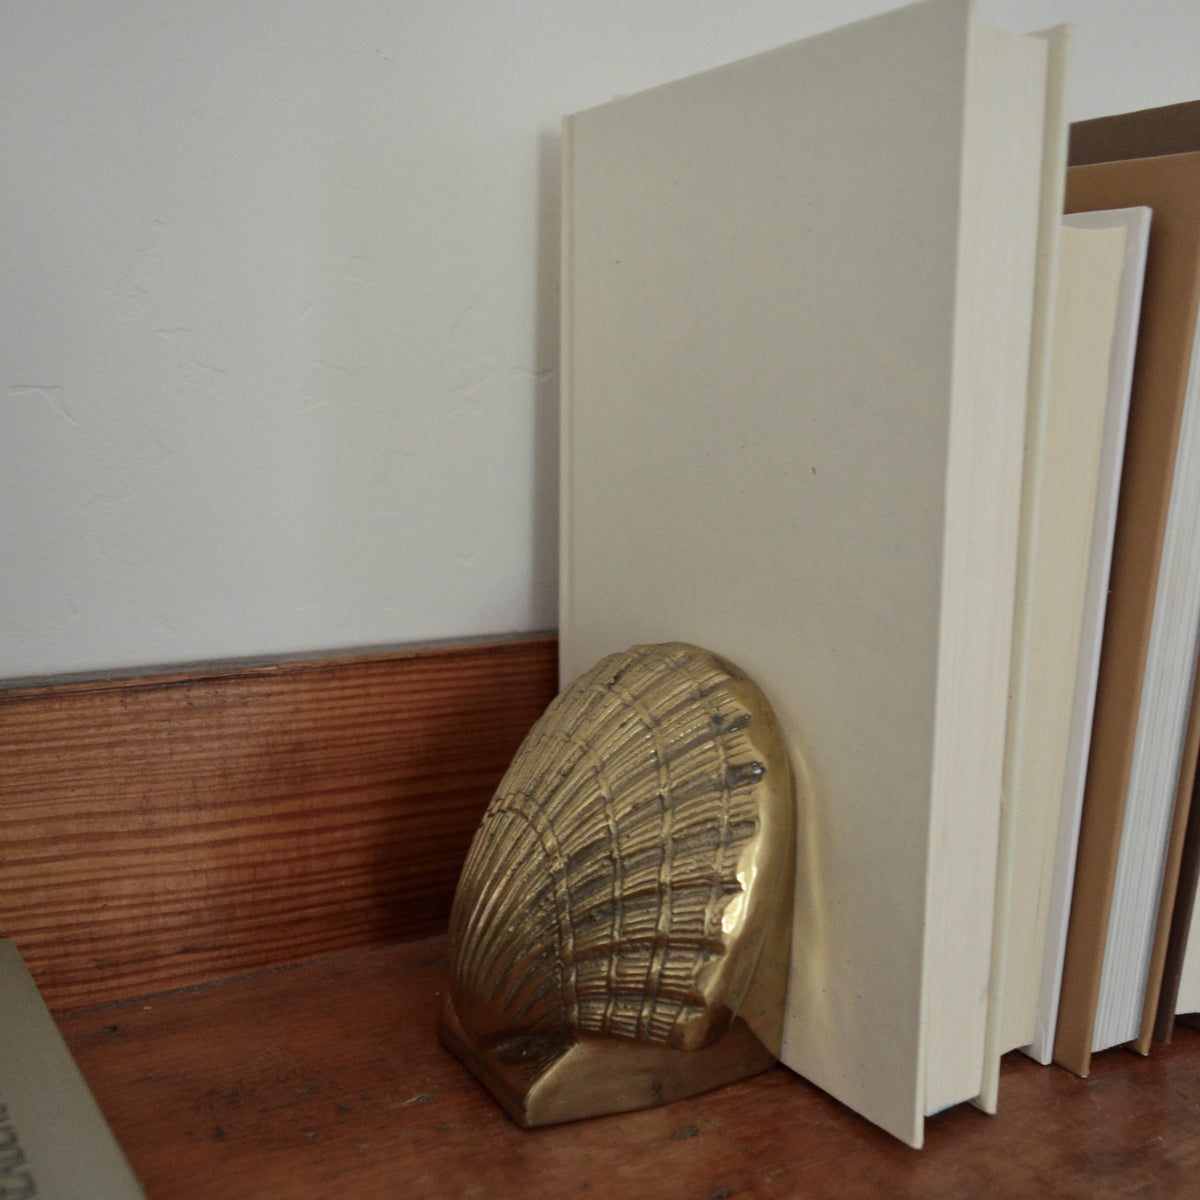 Buy Brass Shell Book Ends Online  Thorn & Thistle Victoria, BC Canada